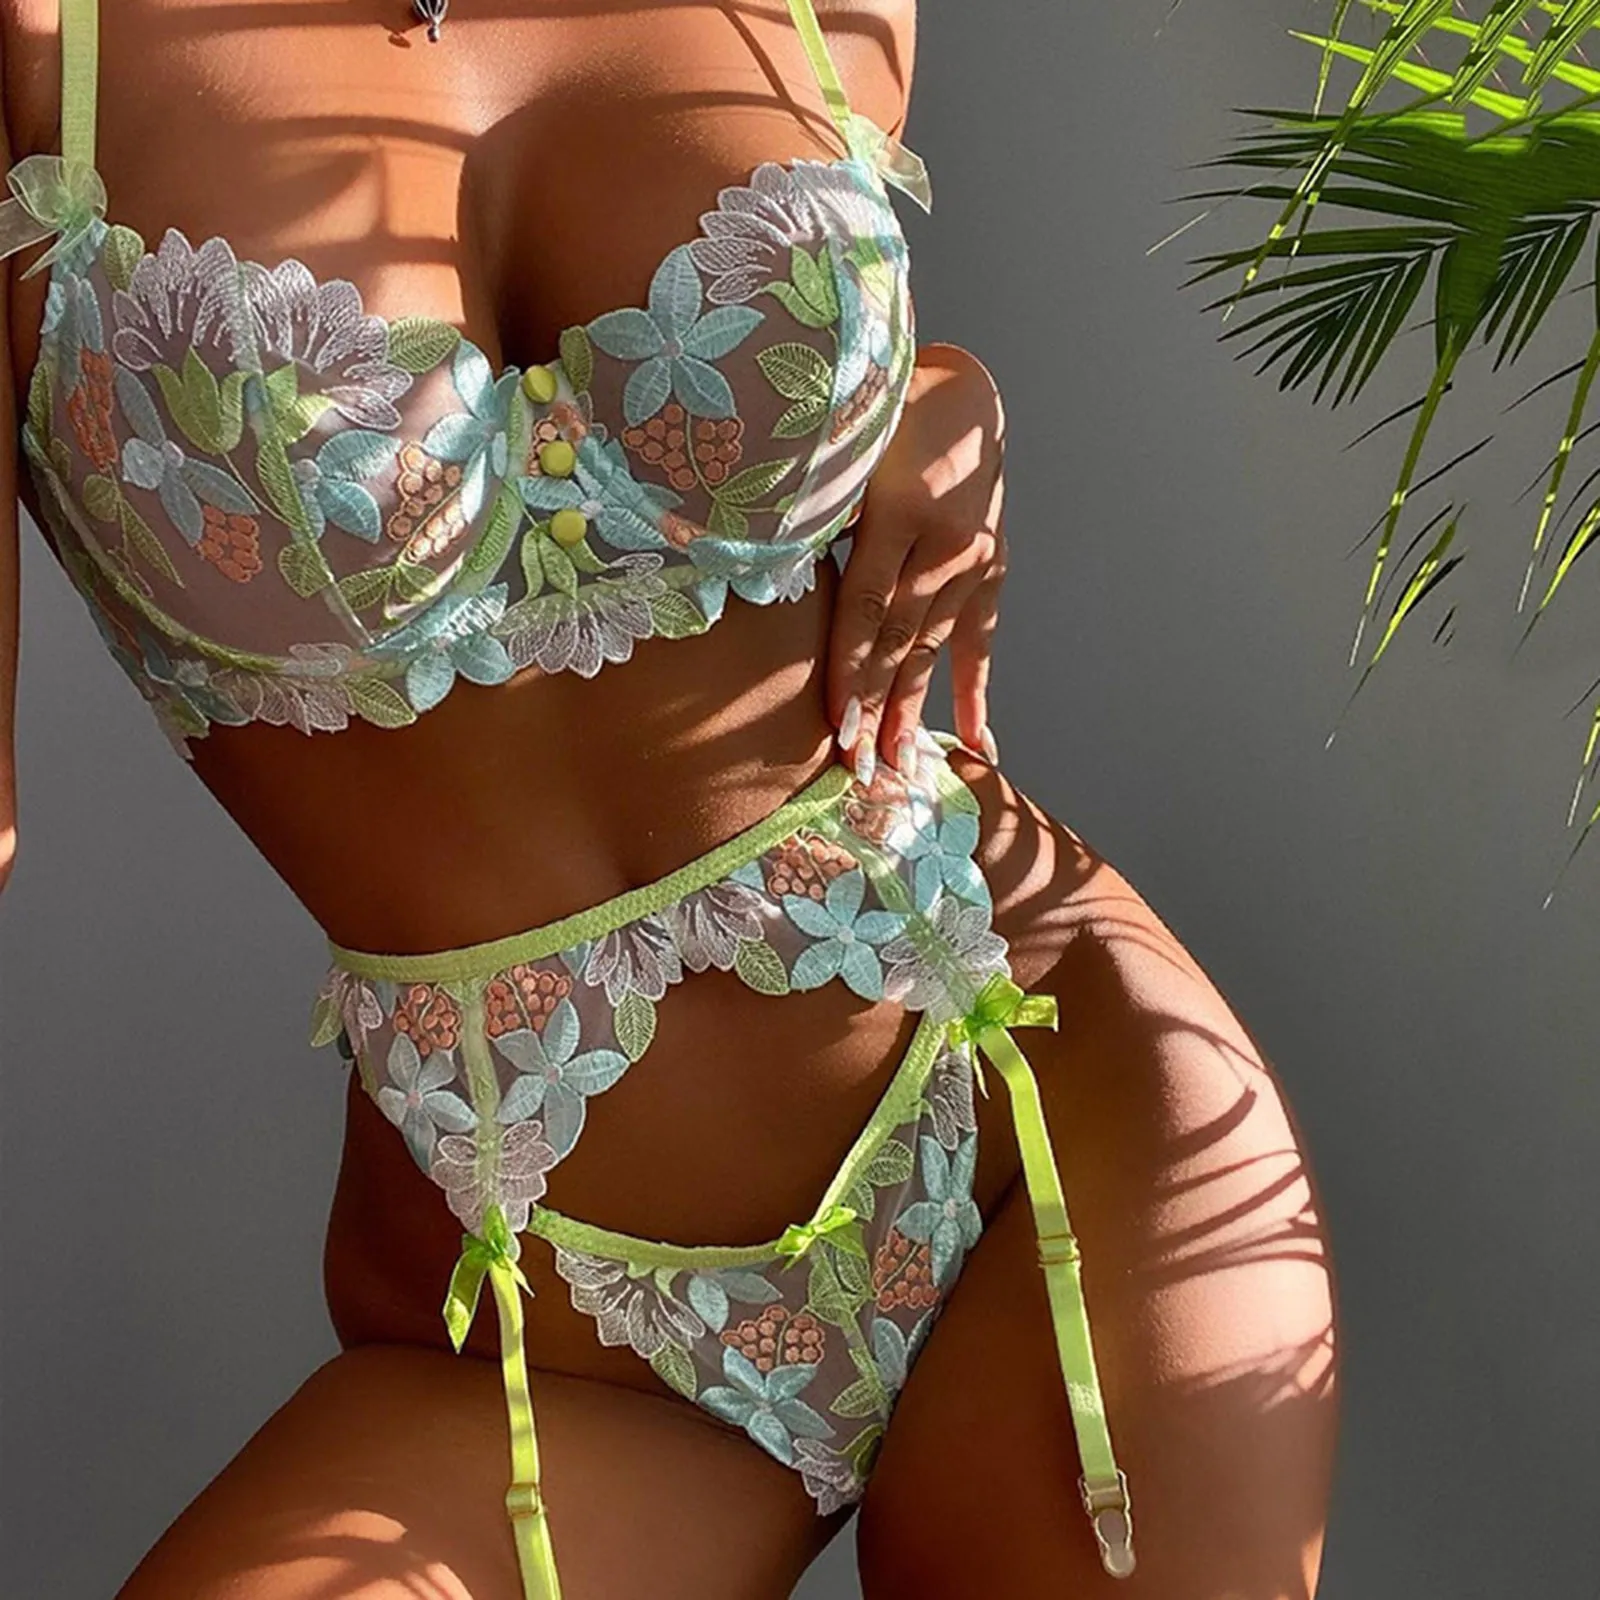 Floral Embroidery Lace Sexy Lingerie Women Underwear Set Mesh Perspective Sexy Bra Brief Sets Fashion Ladies Sensual Lingerie plus size bra and panty sets